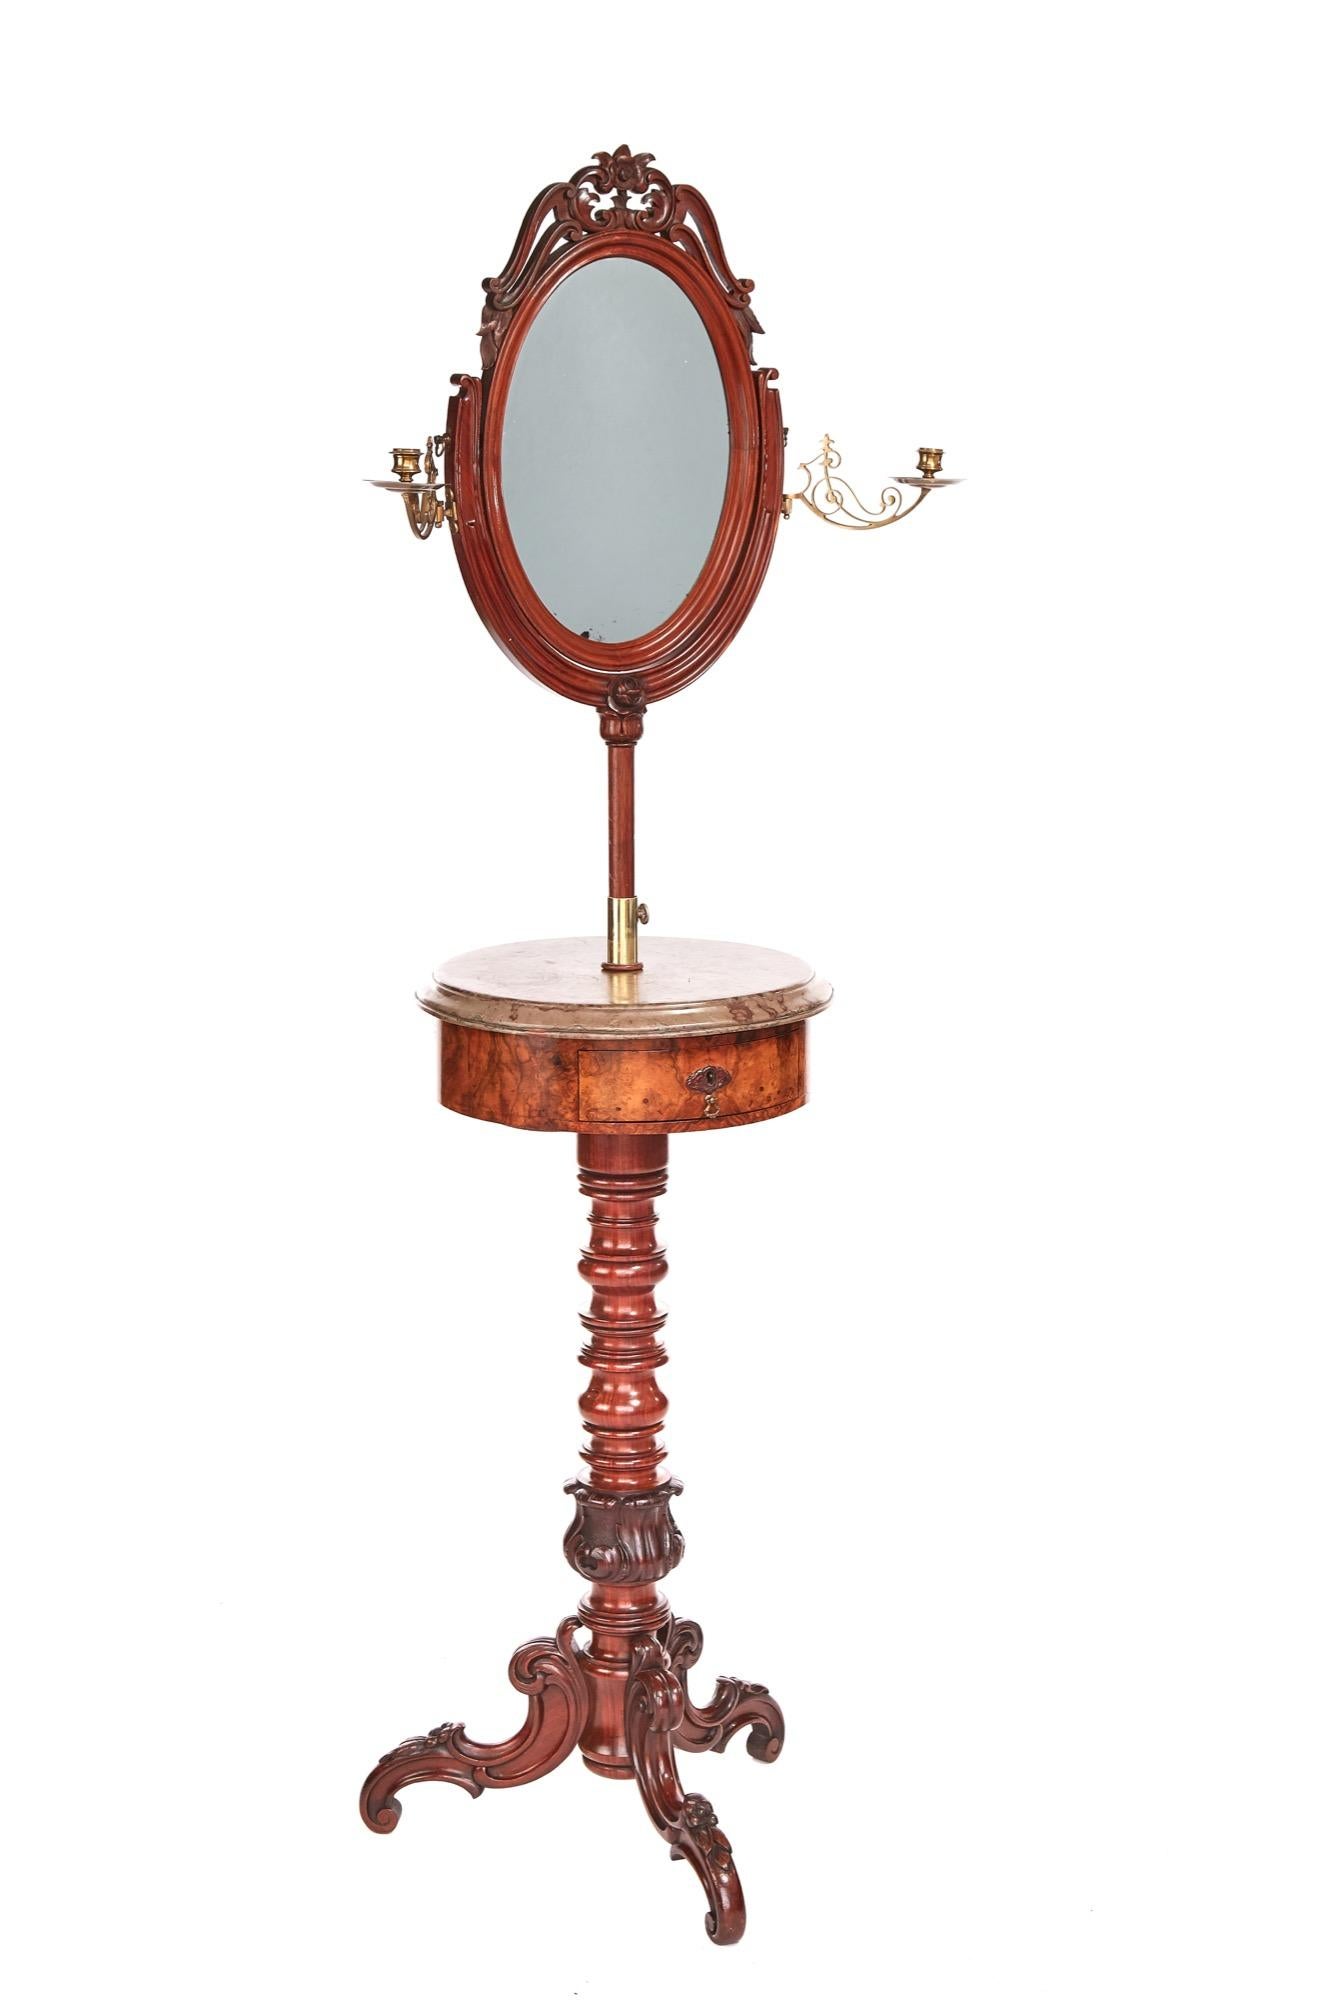 Fine quality antique victorian telescopic dressing stand having an oval mahogany framed swing mirror, with ornate carving on top, supported by a U shaped telescopic frame with brass candle sconces each side, a mottled circular marble top with single